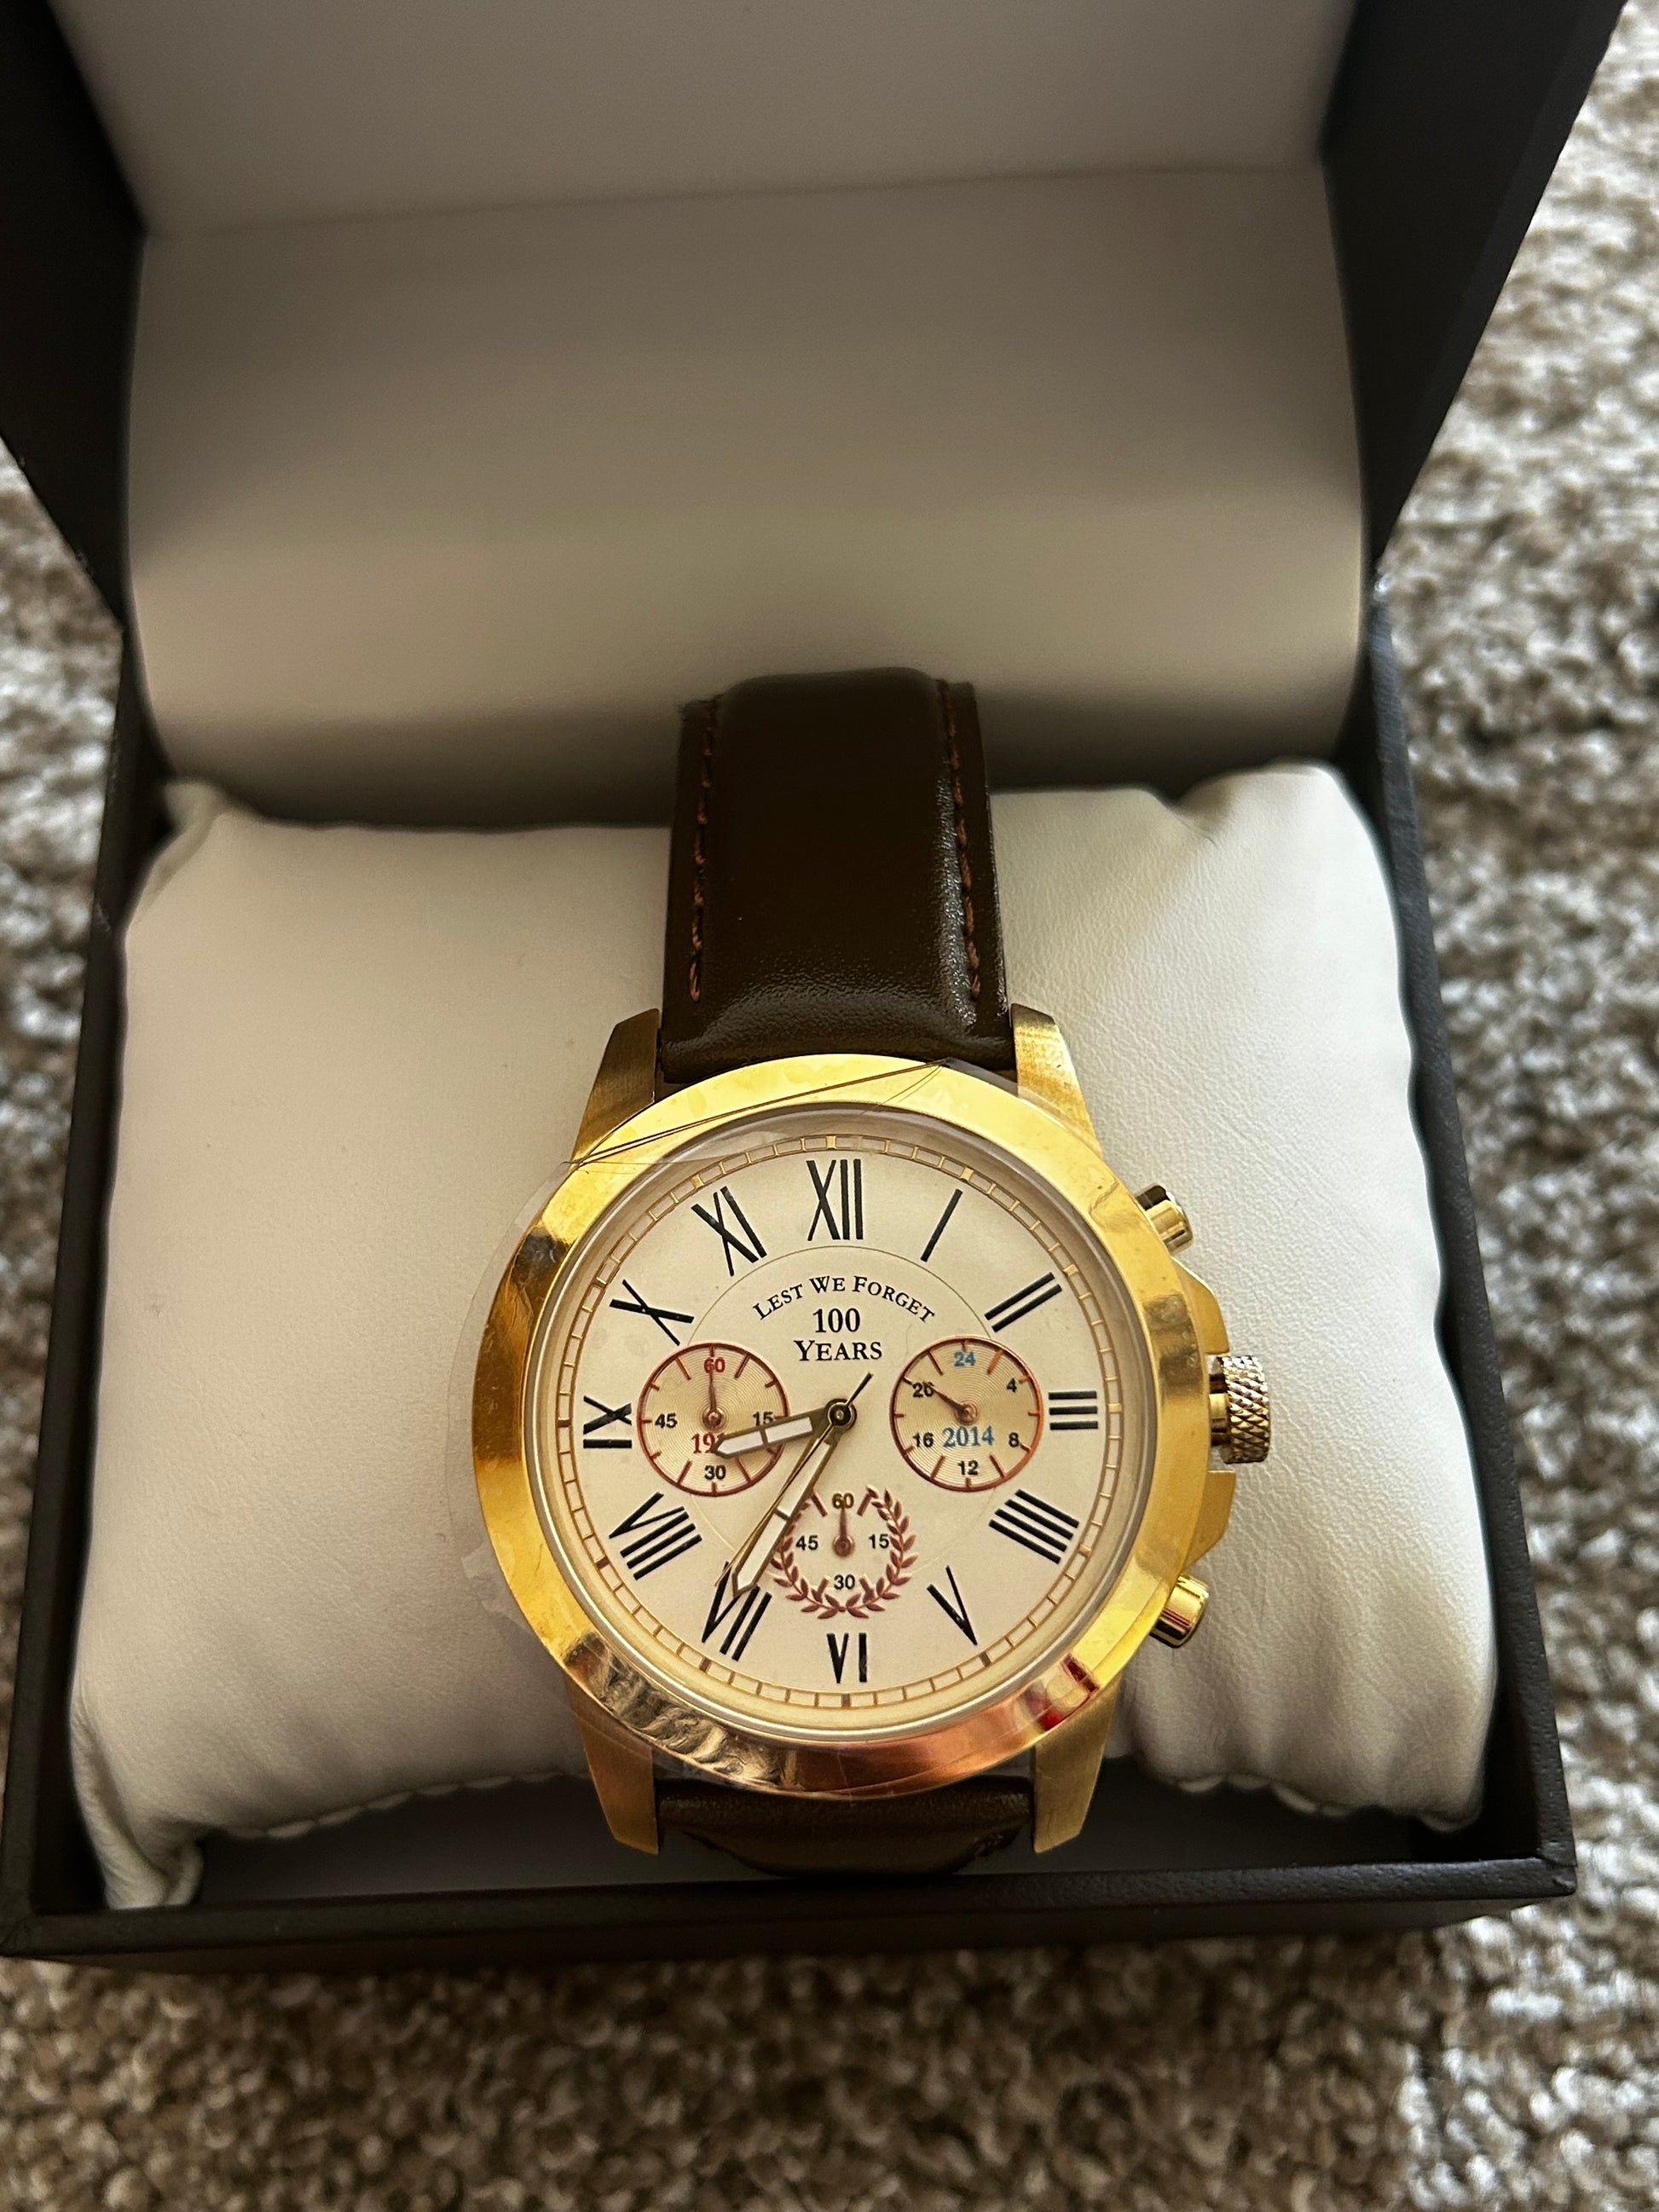 boxed vintage style men's watch